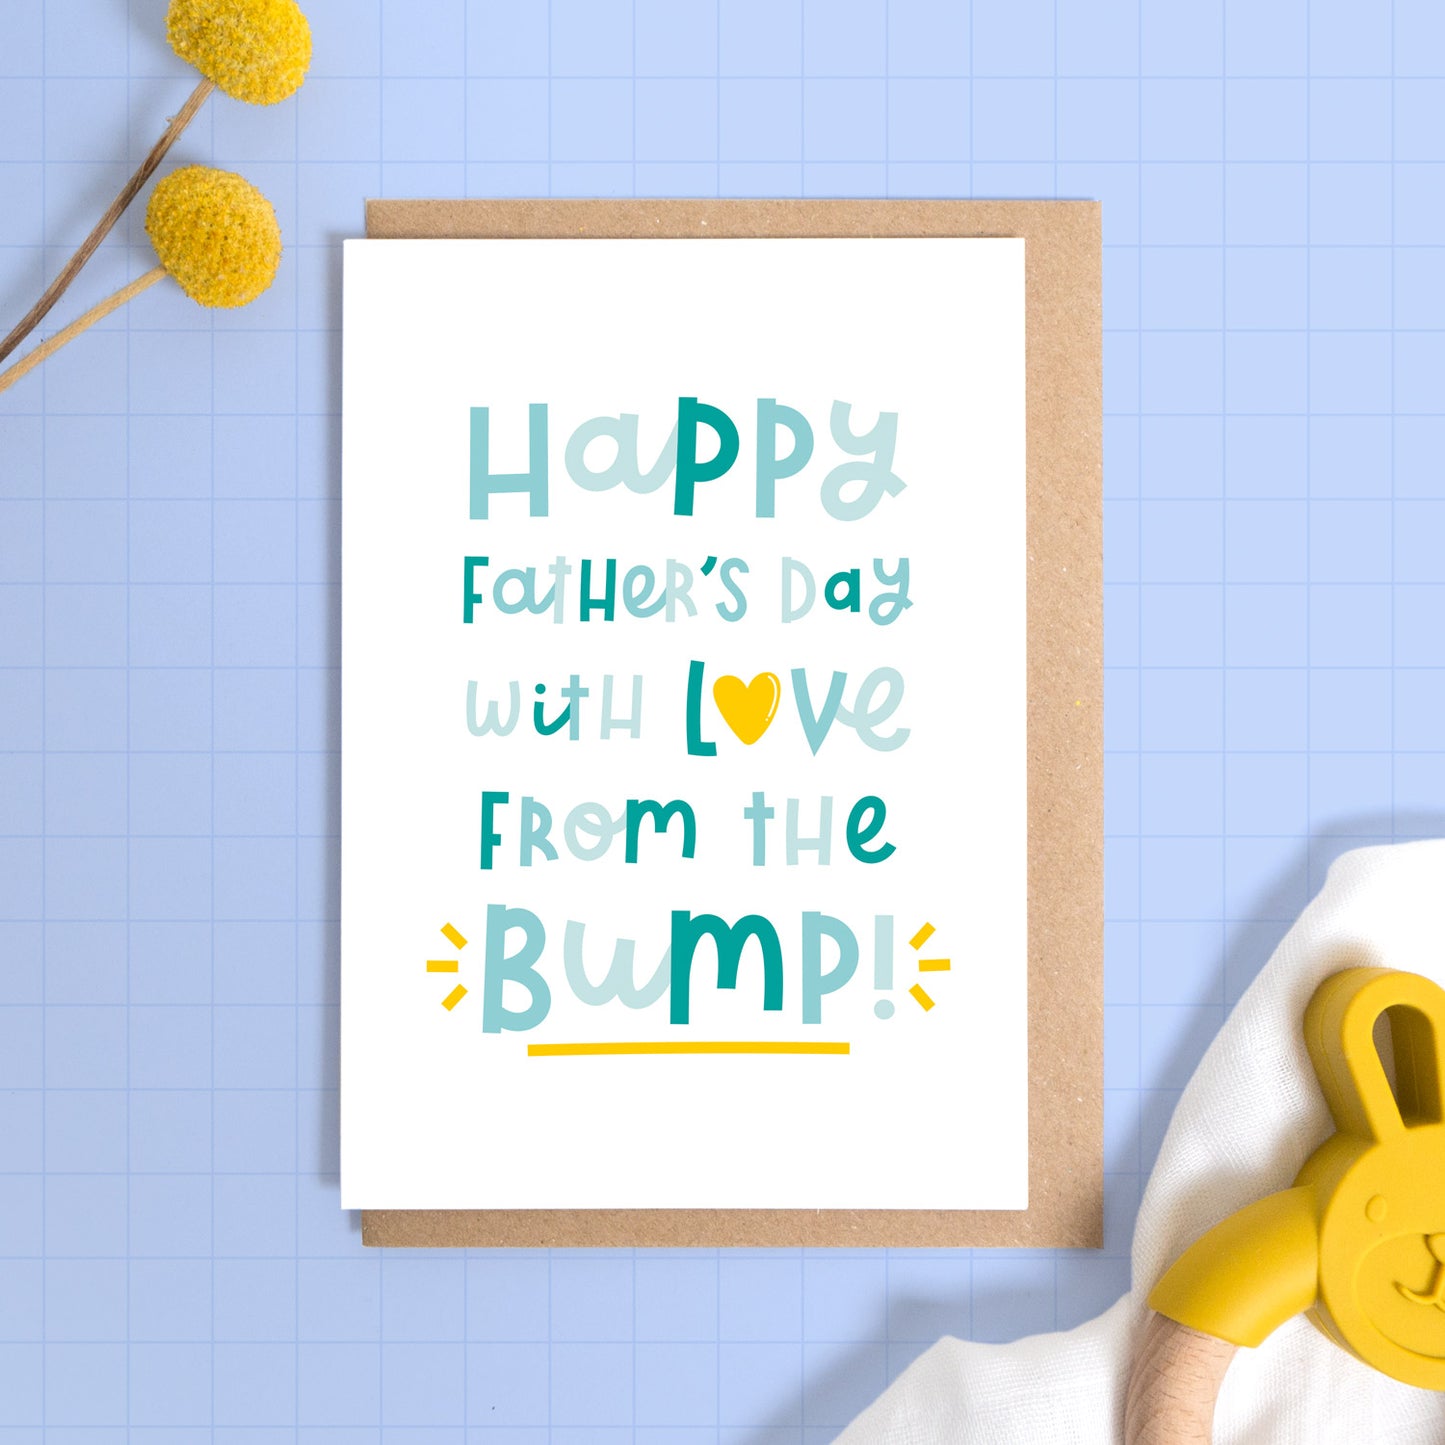 A happy father’s day from the baby bump card set on a blue background with some yellow flowers a muslin cloth and a baby soother.